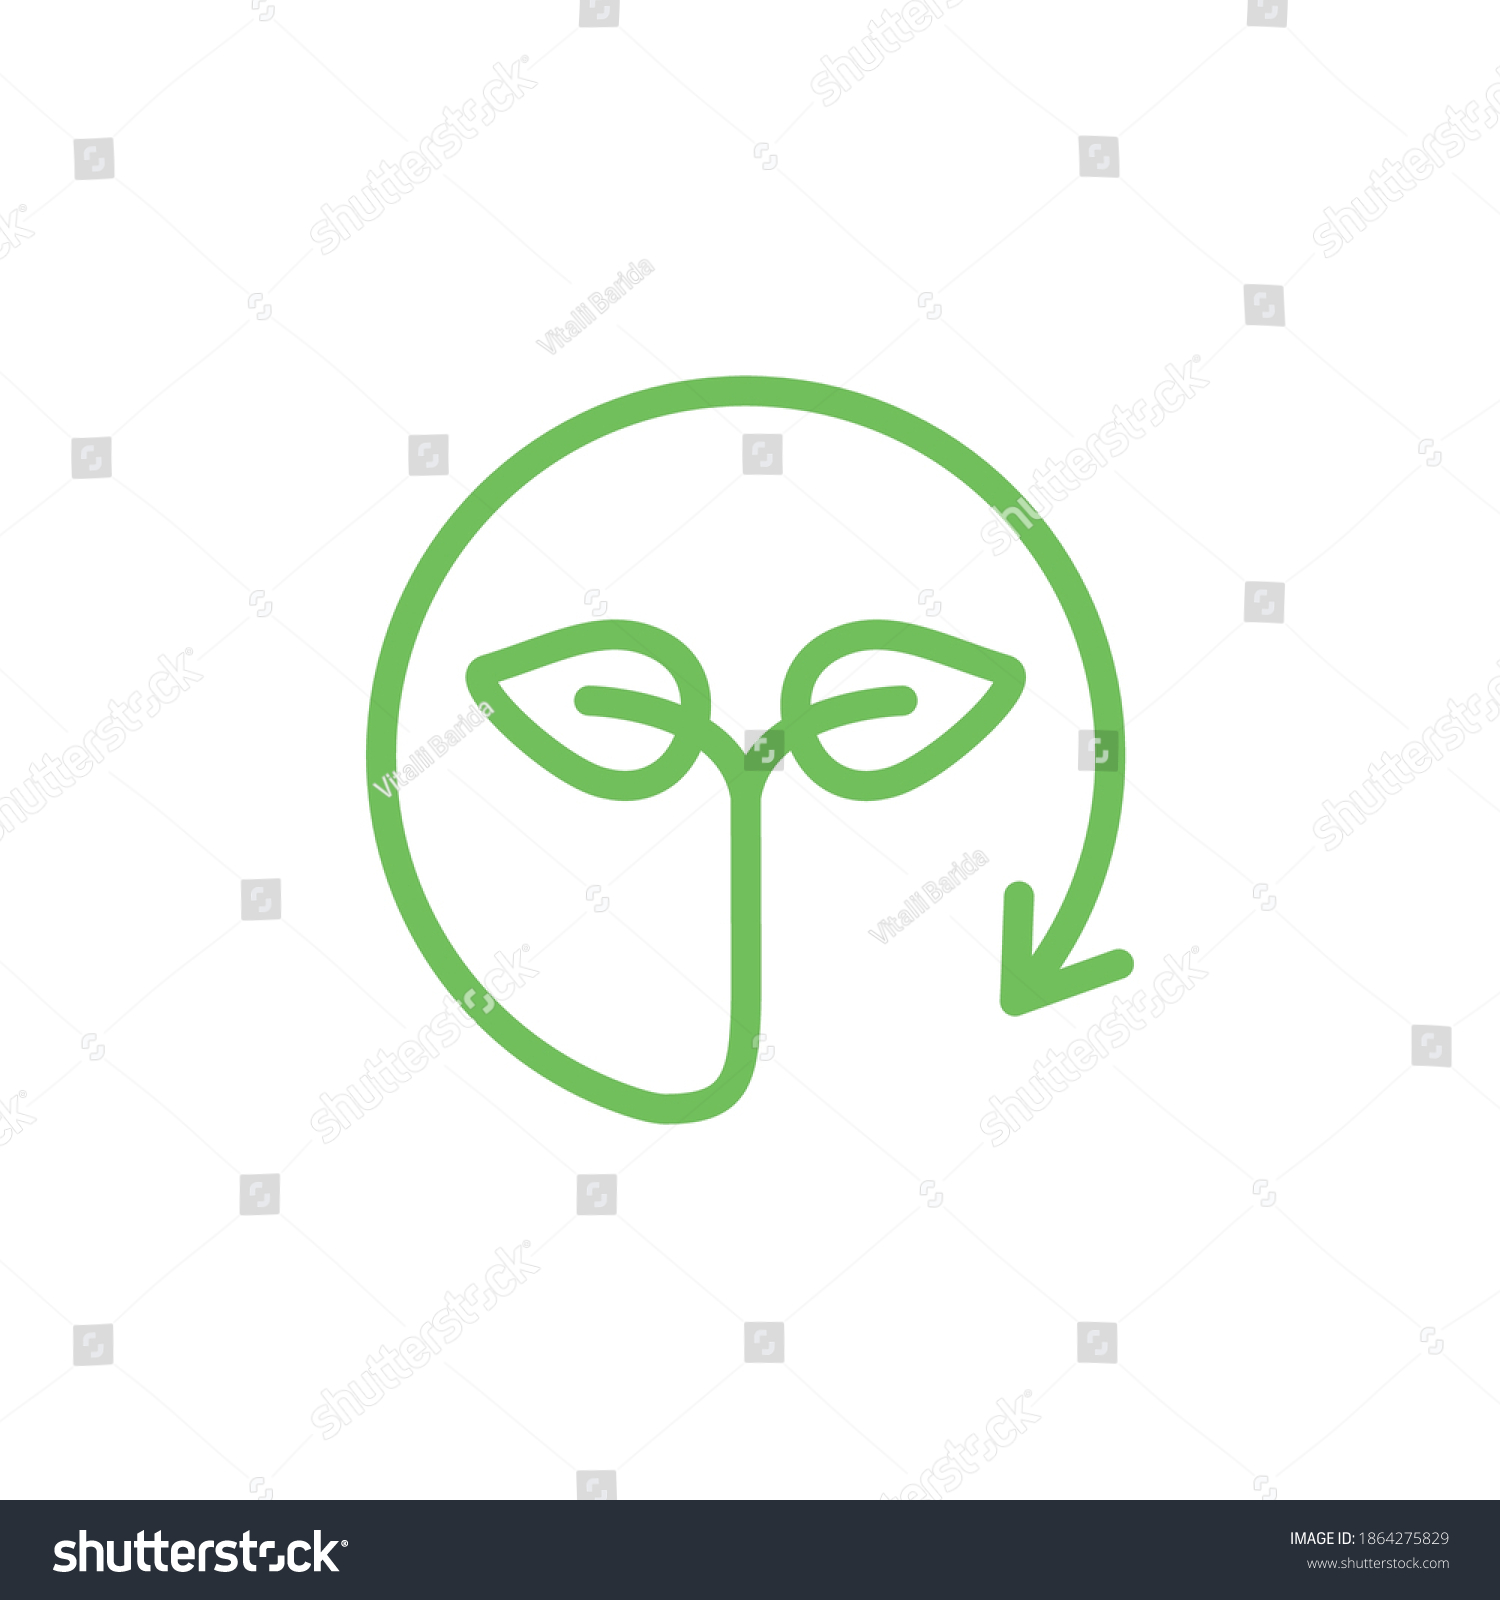 SVG of Biodegradable green icon. Recycle leaf symbol. Bio recycling degradable sign. Vector organic illustration isolated on white svg